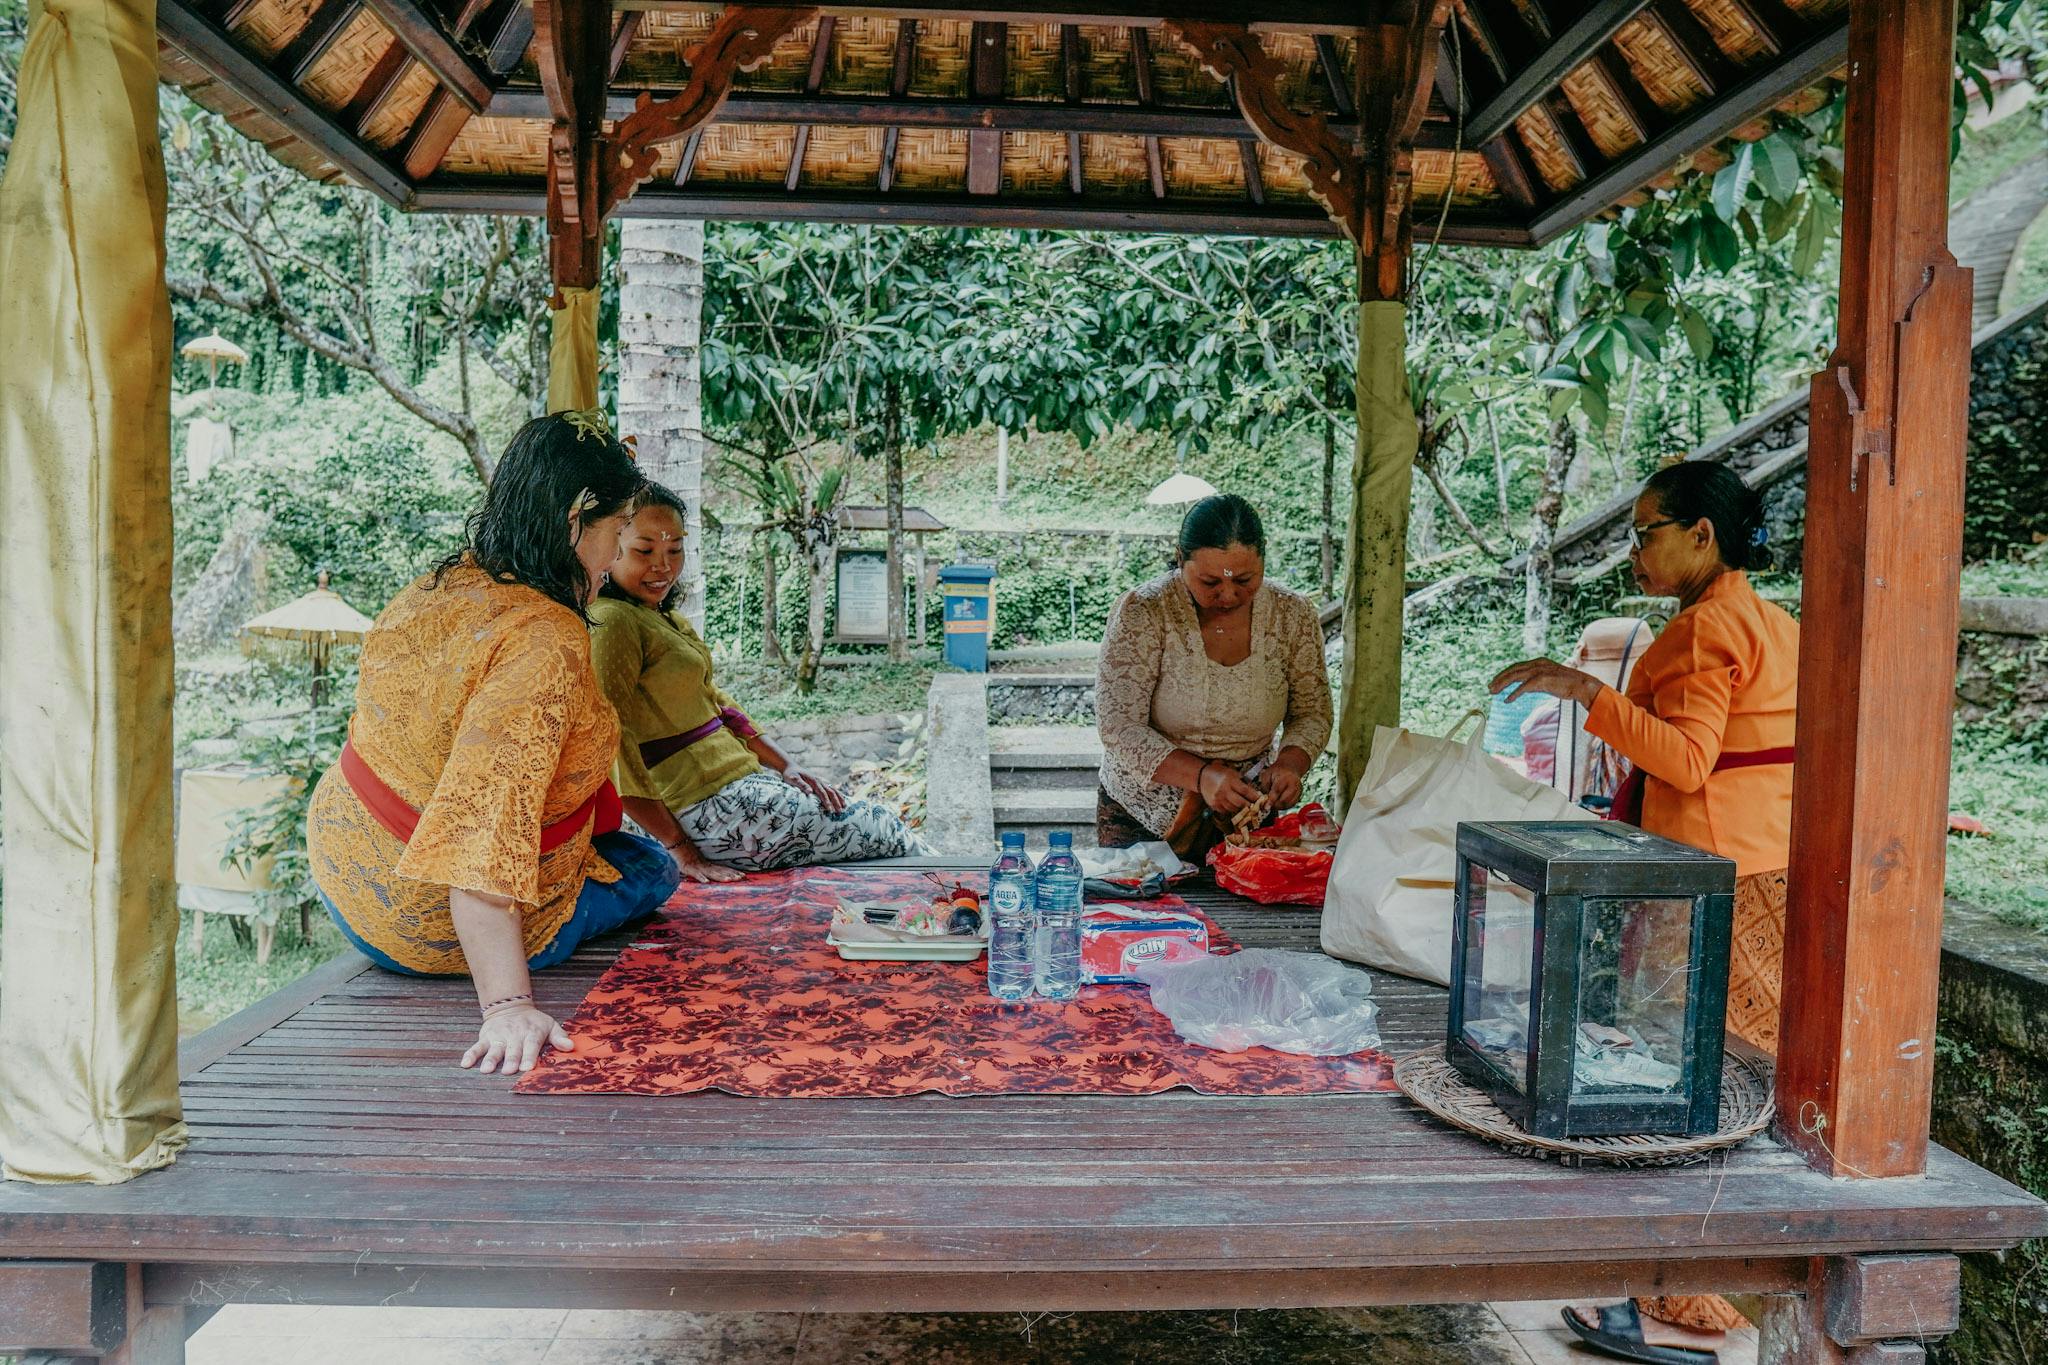 By doing a Melukat with a local family, you're directly supporting local communities and their traditions